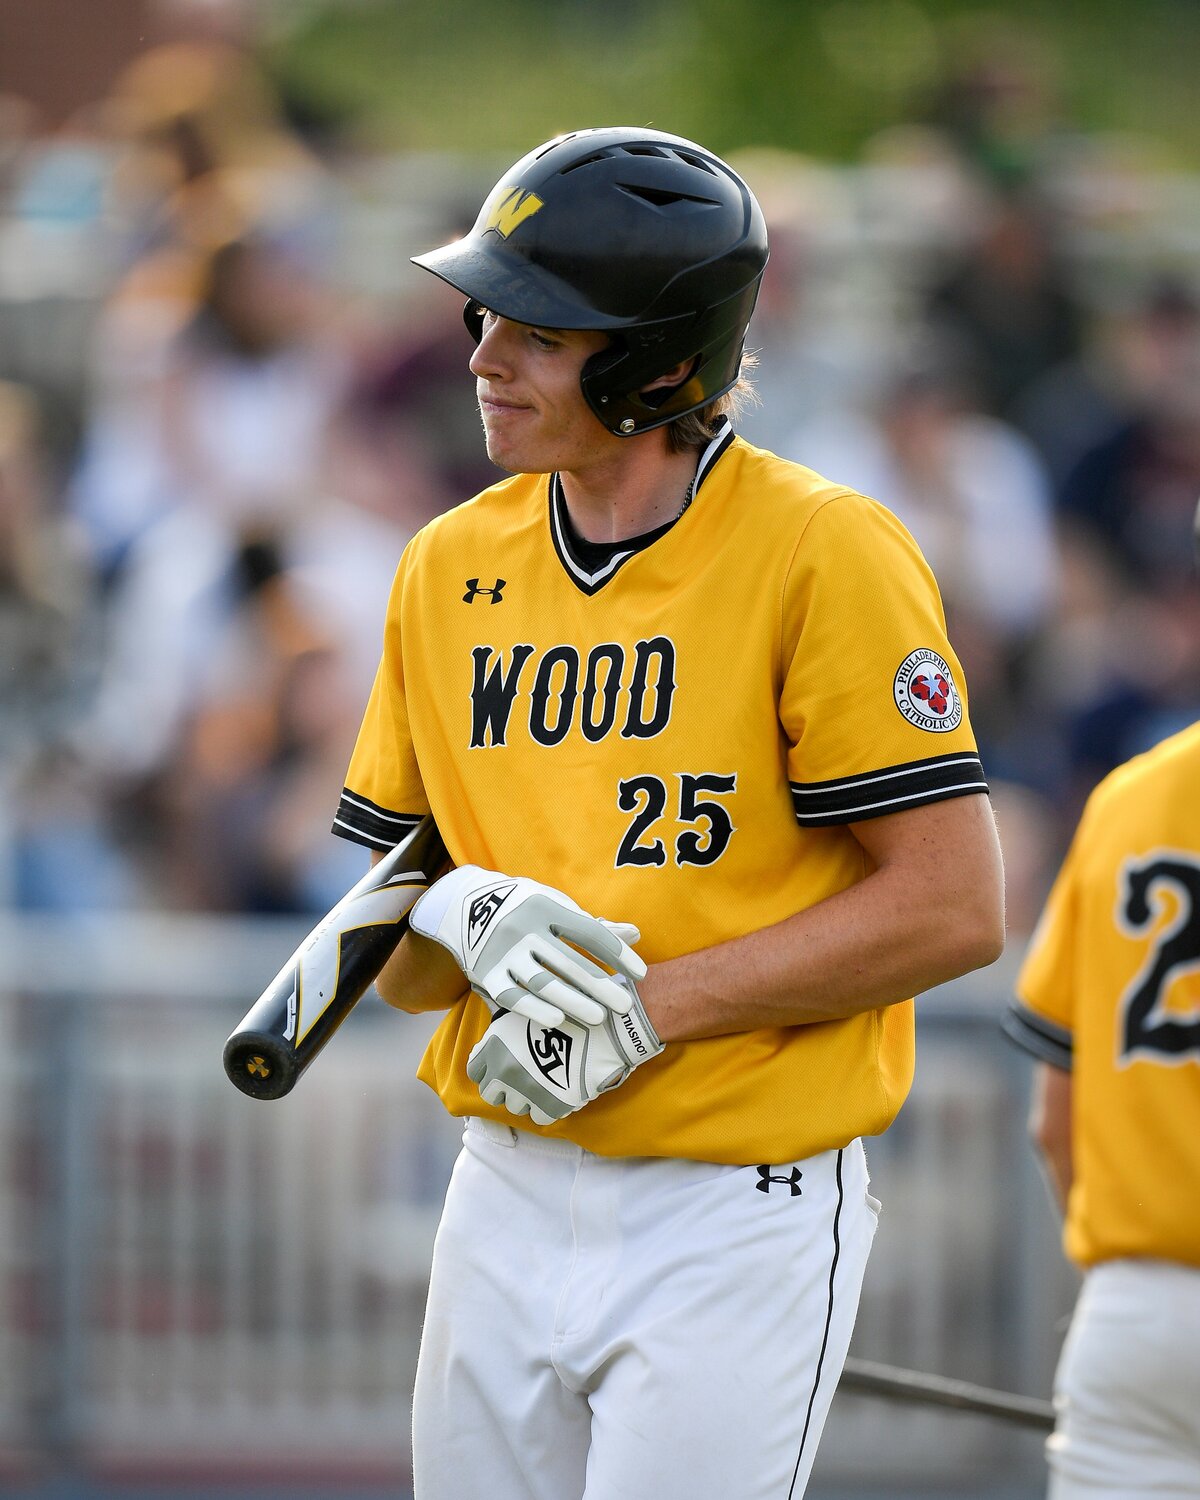 Archbishop Wood’s Jared Uzdzienski shows his frustration after going down on strikes in the top of the seventh inning.